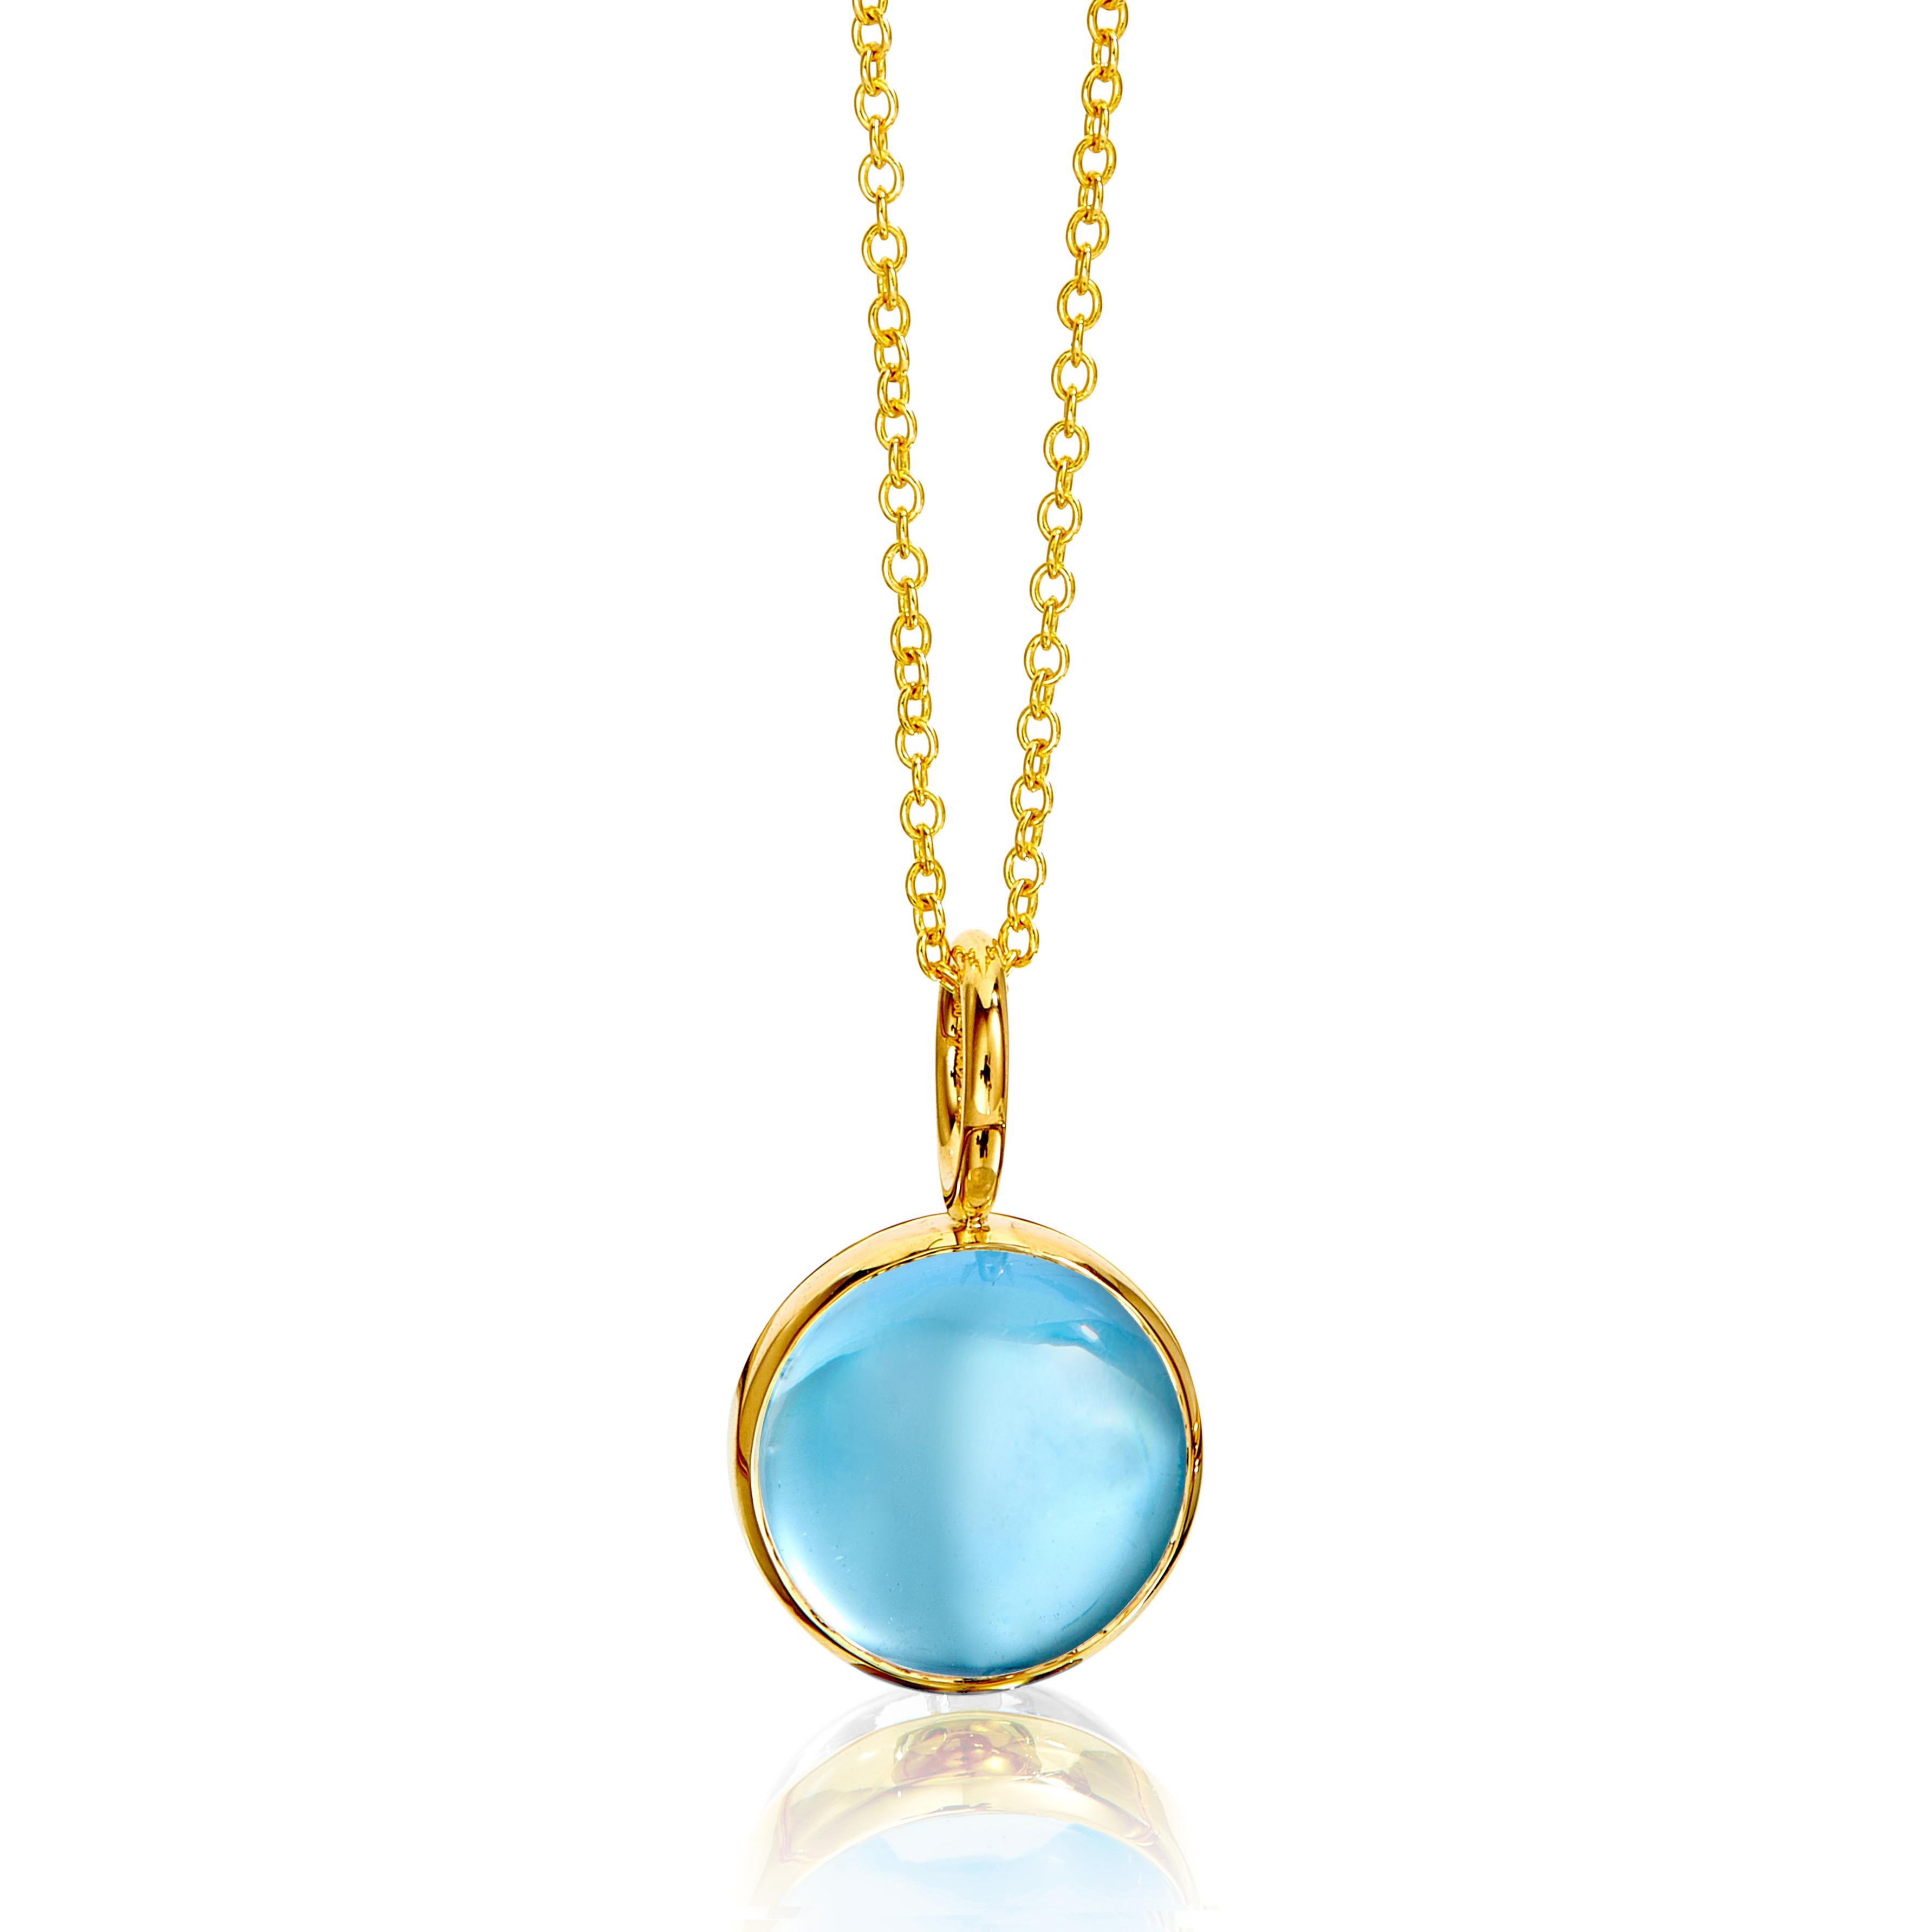 Created in 18 karat yellow gold
Blue topaz 6.50 carats approx.
Moon quartz 5 carats approx.
Reversible pendant
Chain sold separately


About the Designers ~ Dharmesh & Namrata

Drawing inspiration from little things, Dharmesh & Namrata Kothari have